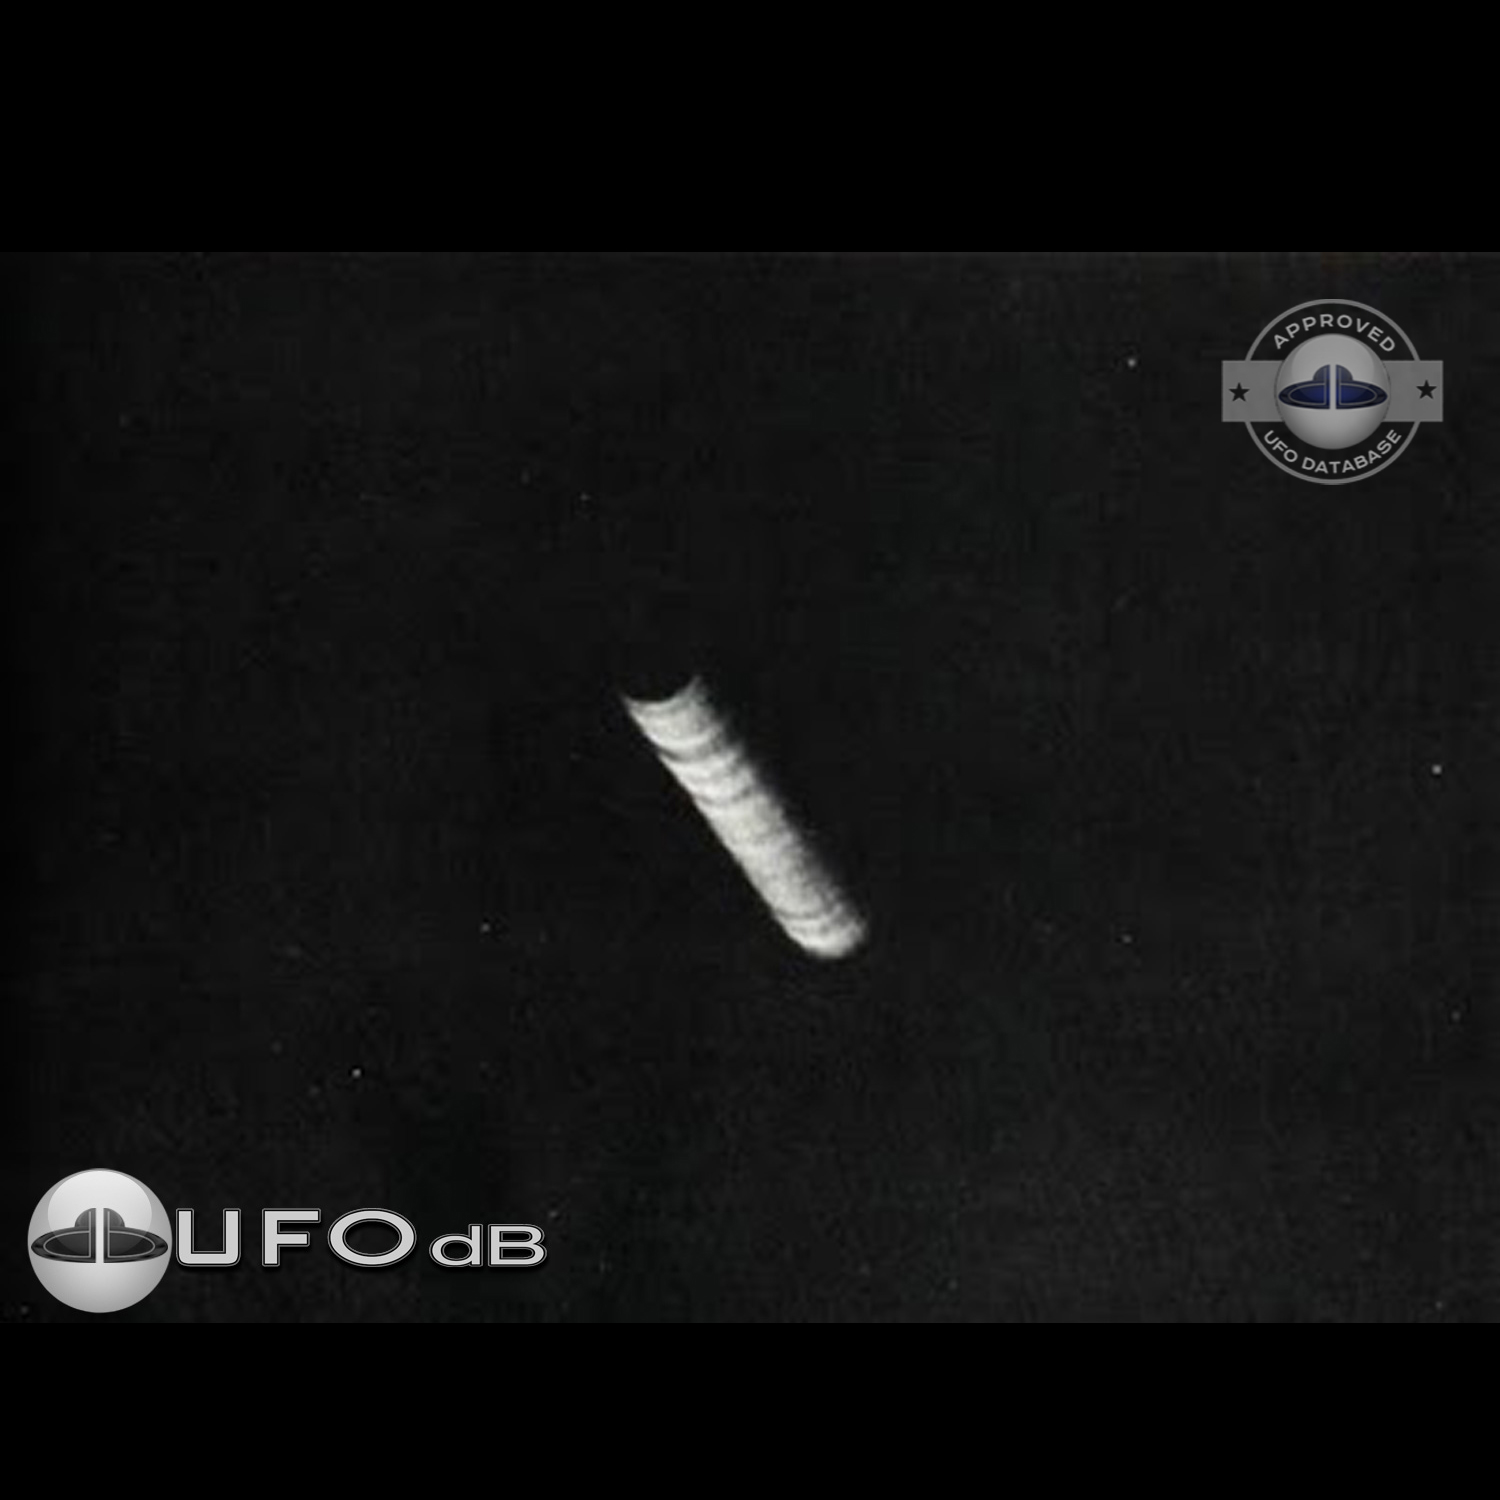 Tube shaped UFO - We can see the black hole at the end | New York UFO Picture #114-1